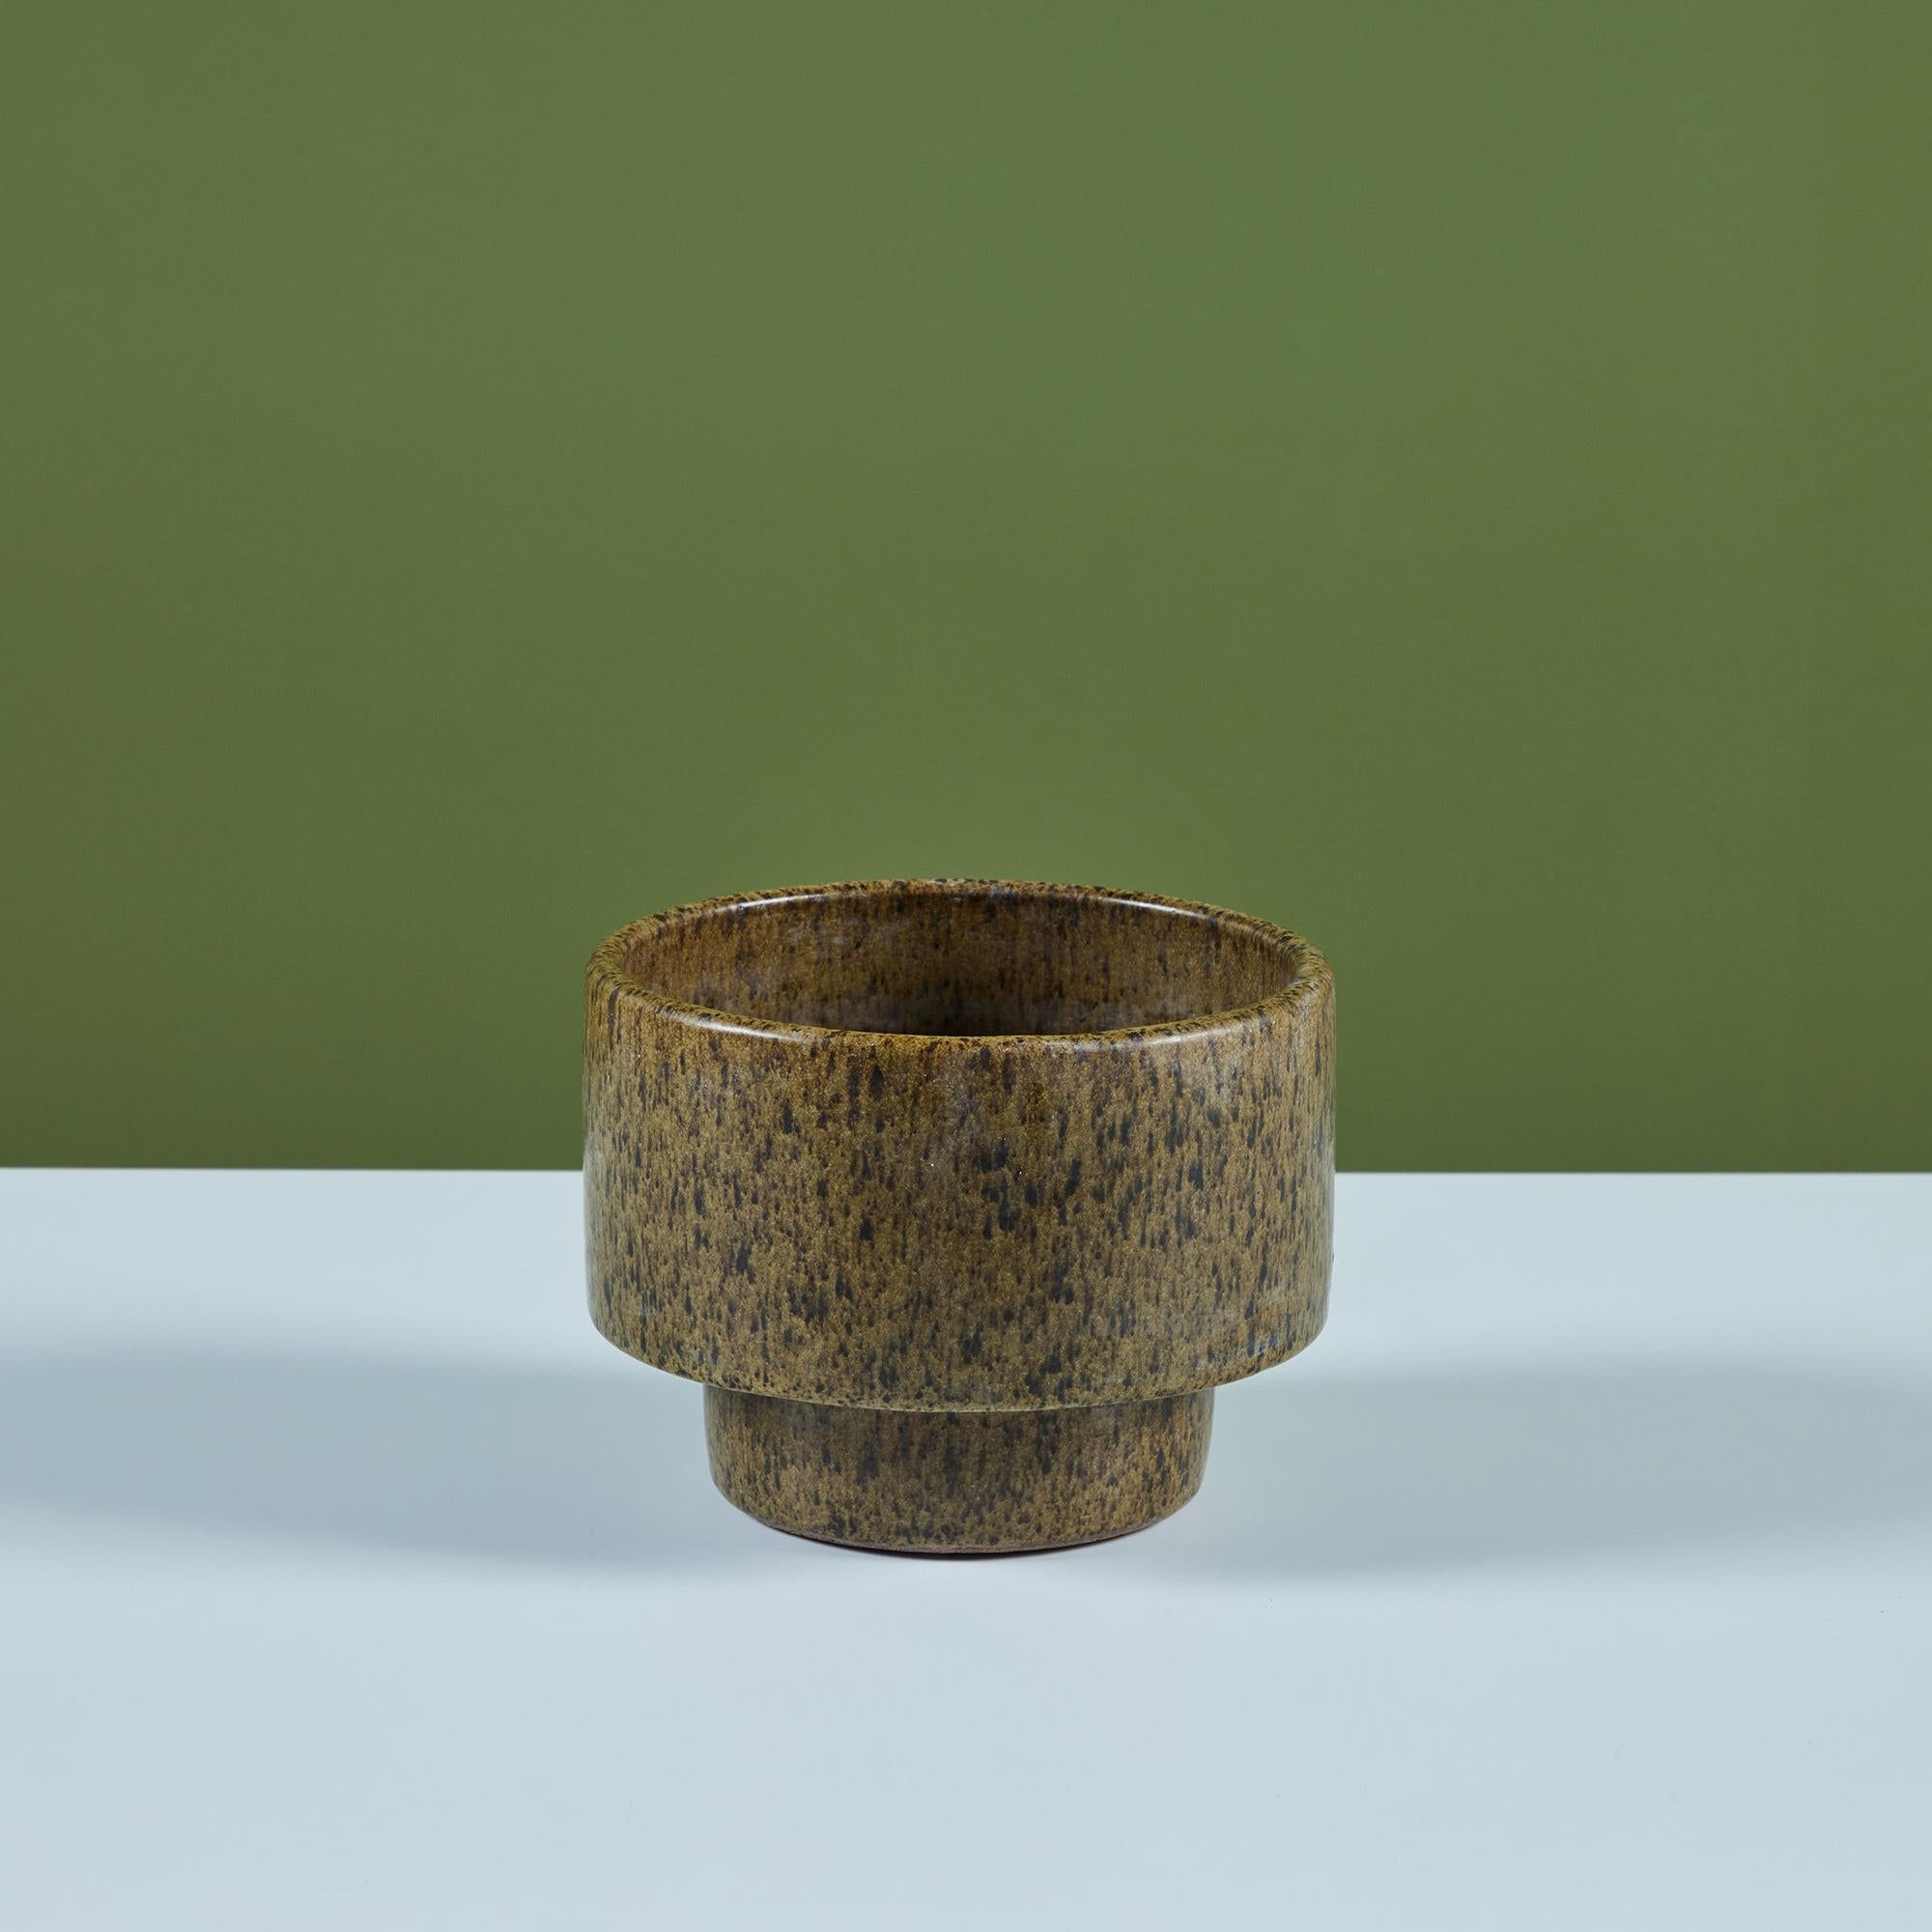 David Cressey Pro/Artisan collection planter for Architectural Pottery. This stoneware planter has a speckle glazed interior and exterior in light olive. The petite table planter has large cylindrical body and tapers to a slightly smaller